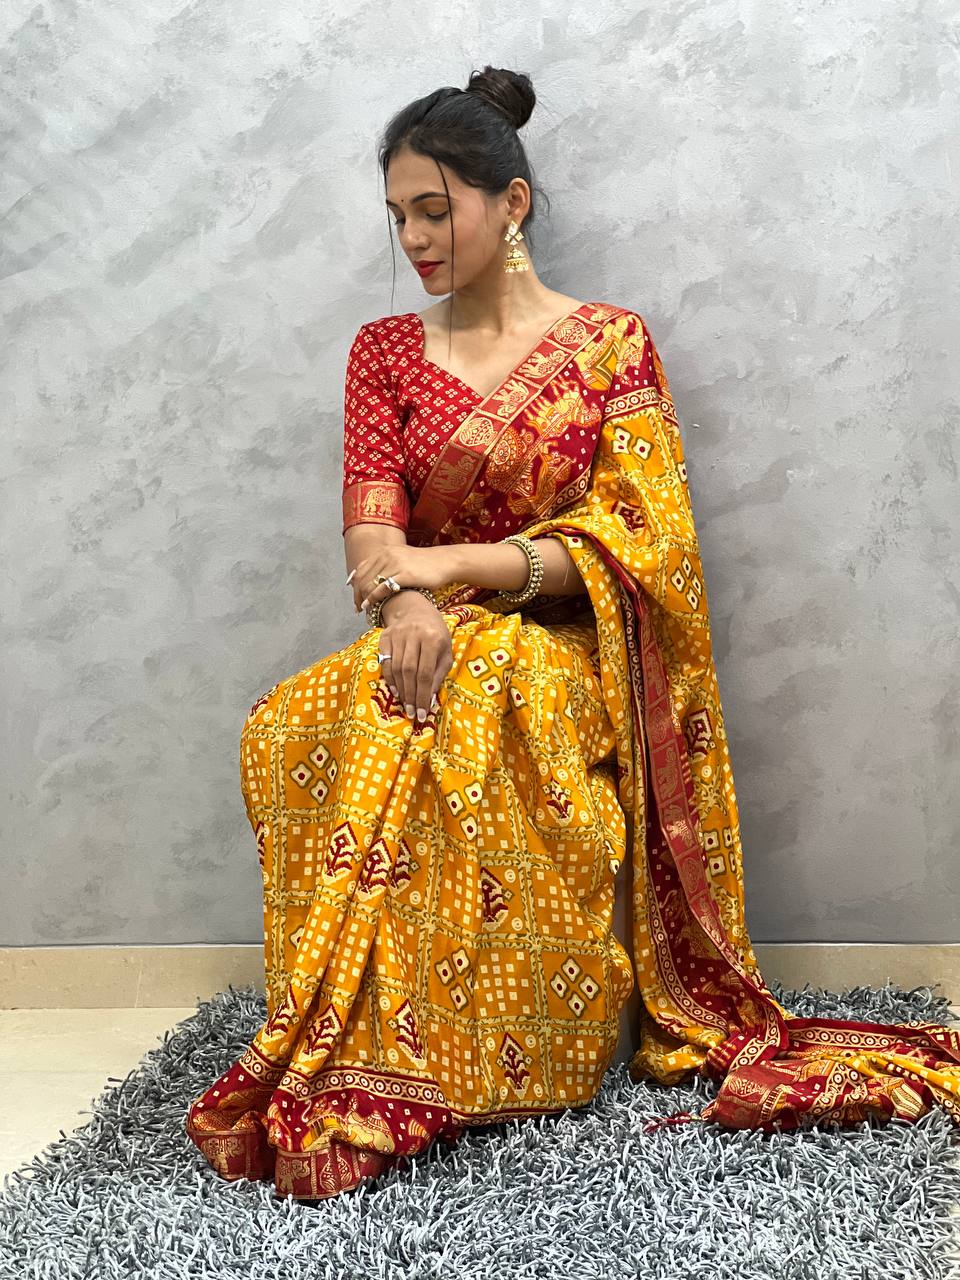 Keerthy Suresh Stuns in turning heads with her elegance in yellow saree |  Times of India